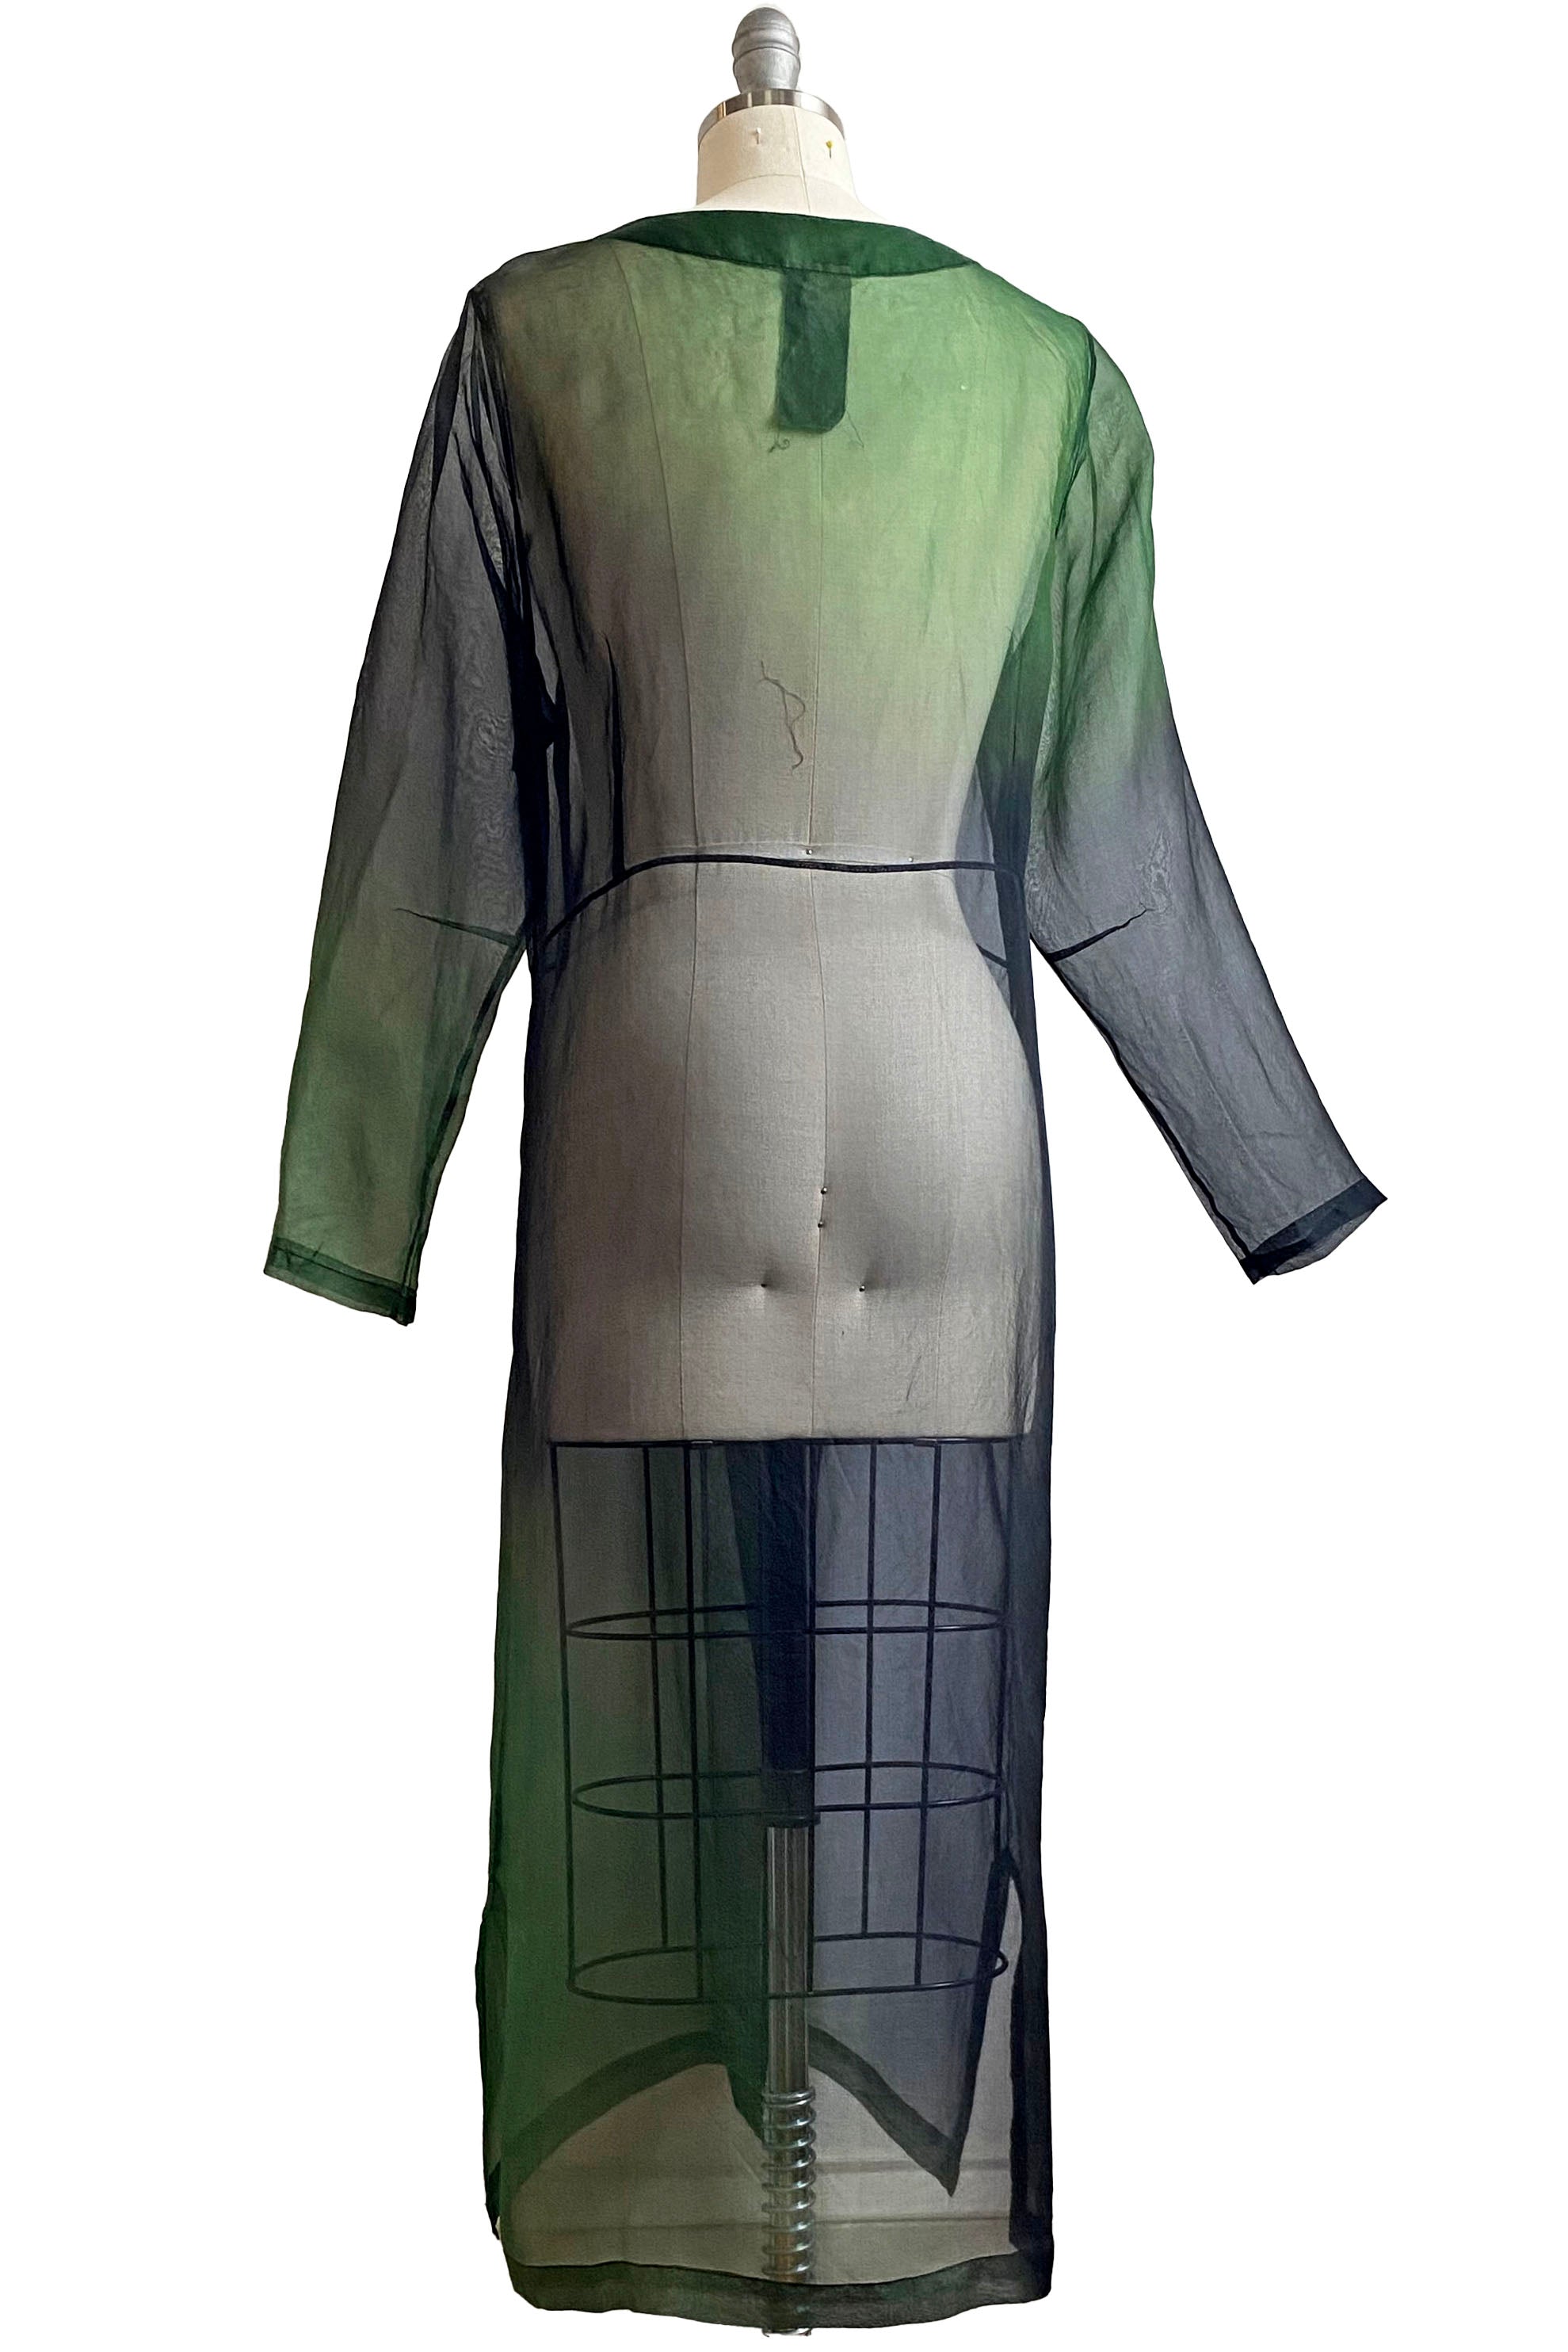 Fez Tunic w/ Ombre Dye - Ink & Green - Large